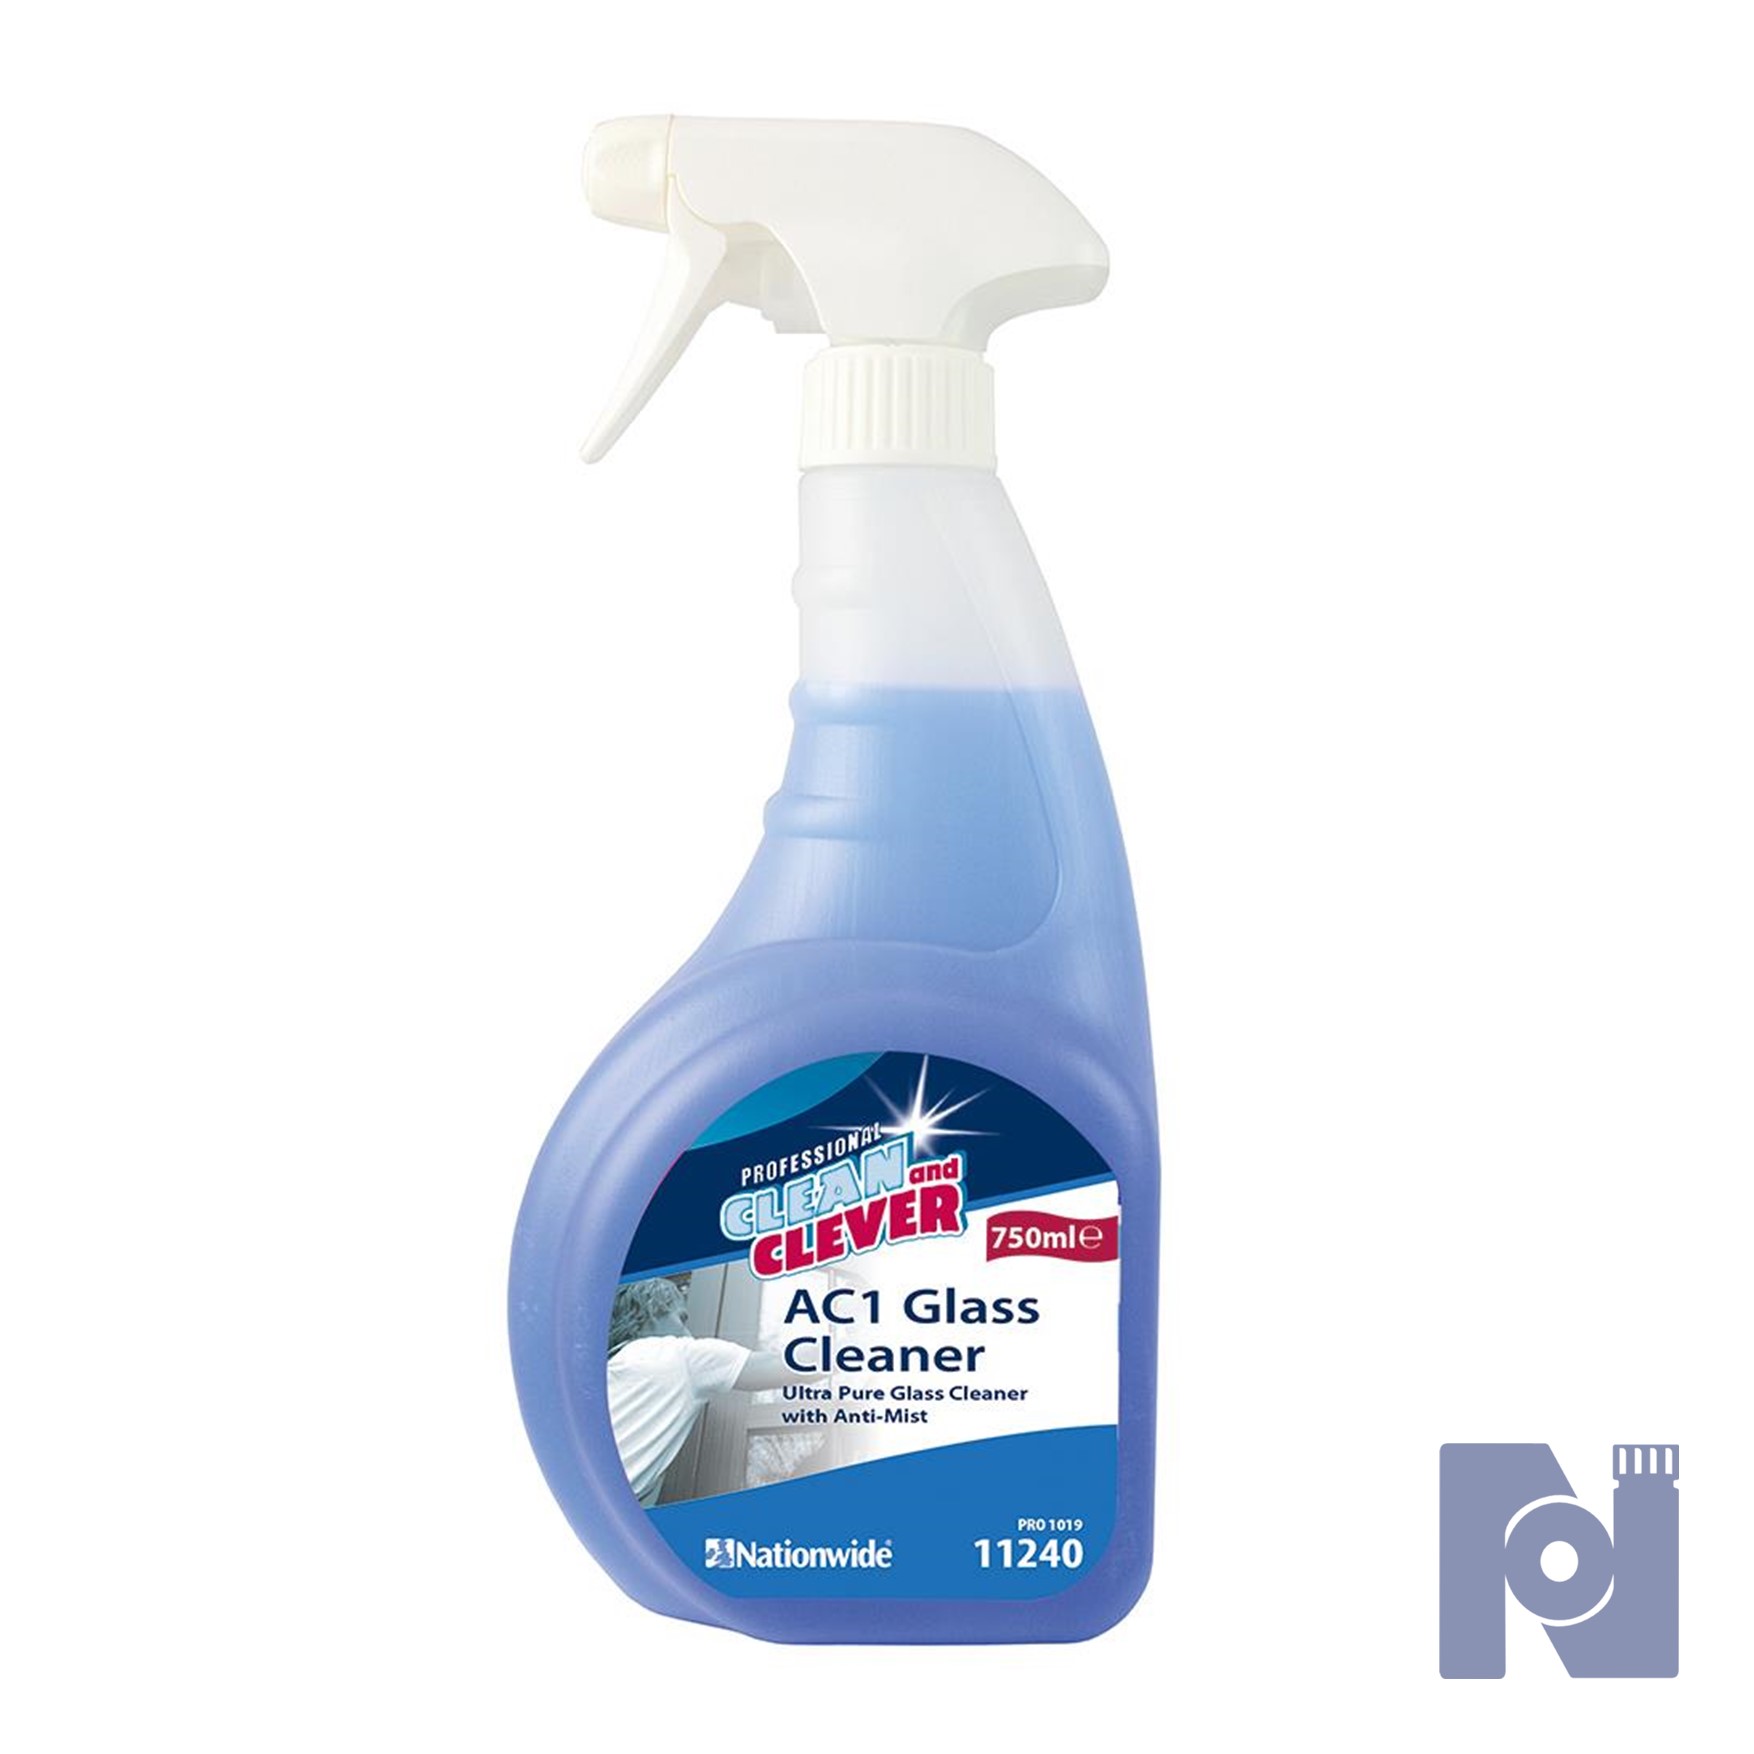 Clean & Clever AC1 Window & Glass Cleaner Trigger